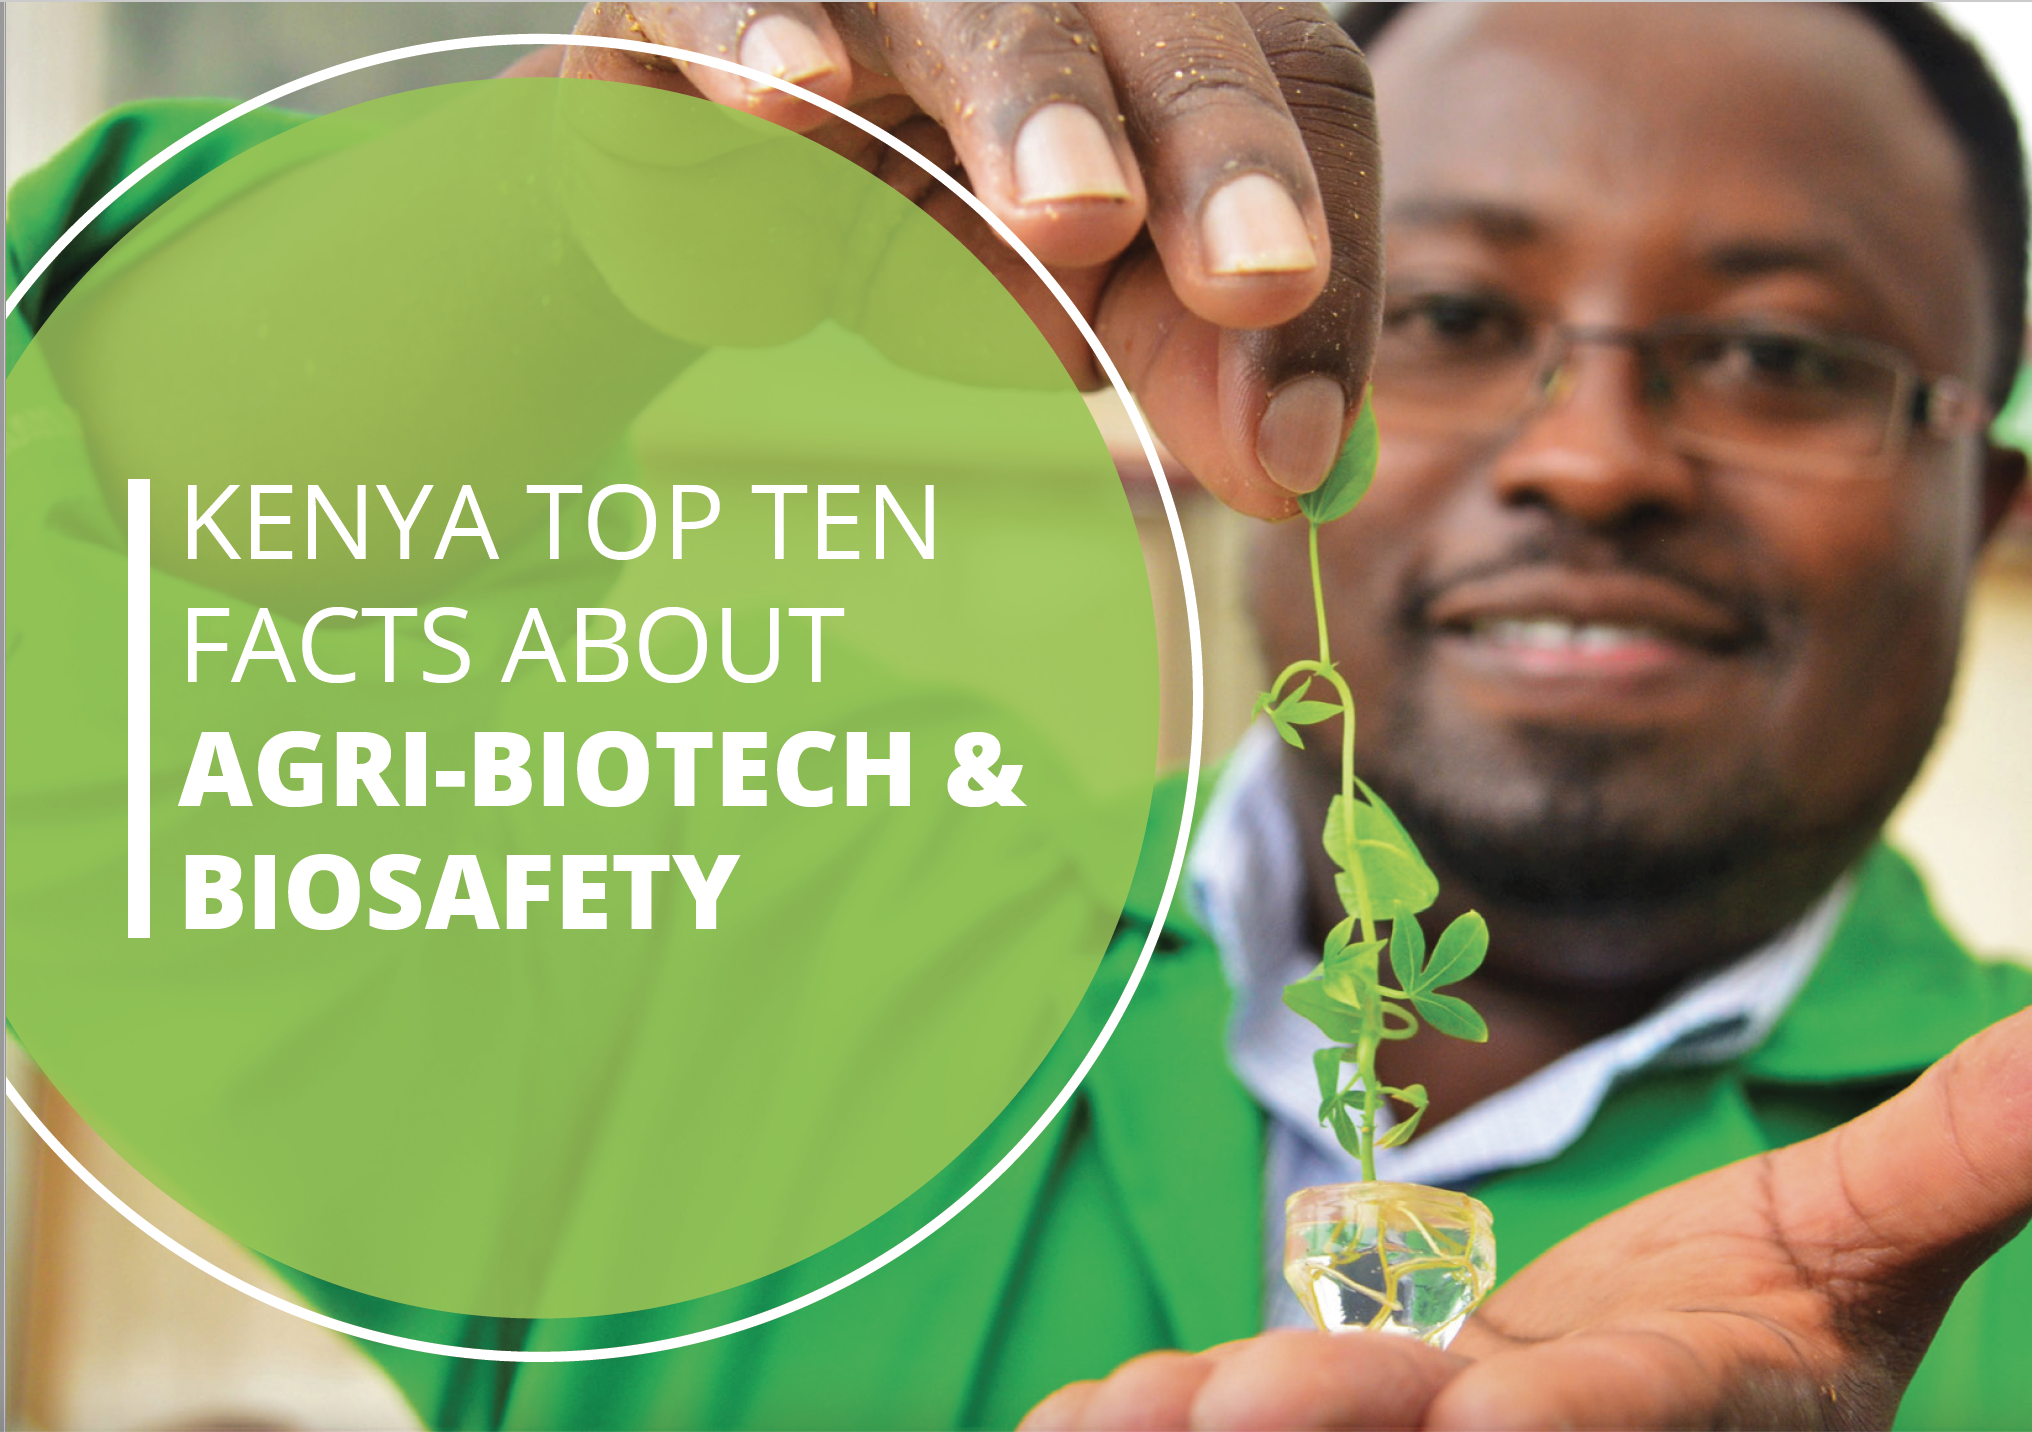 Kenya Top Ten Facts about Agri-Biotech and Biosafety by 2020